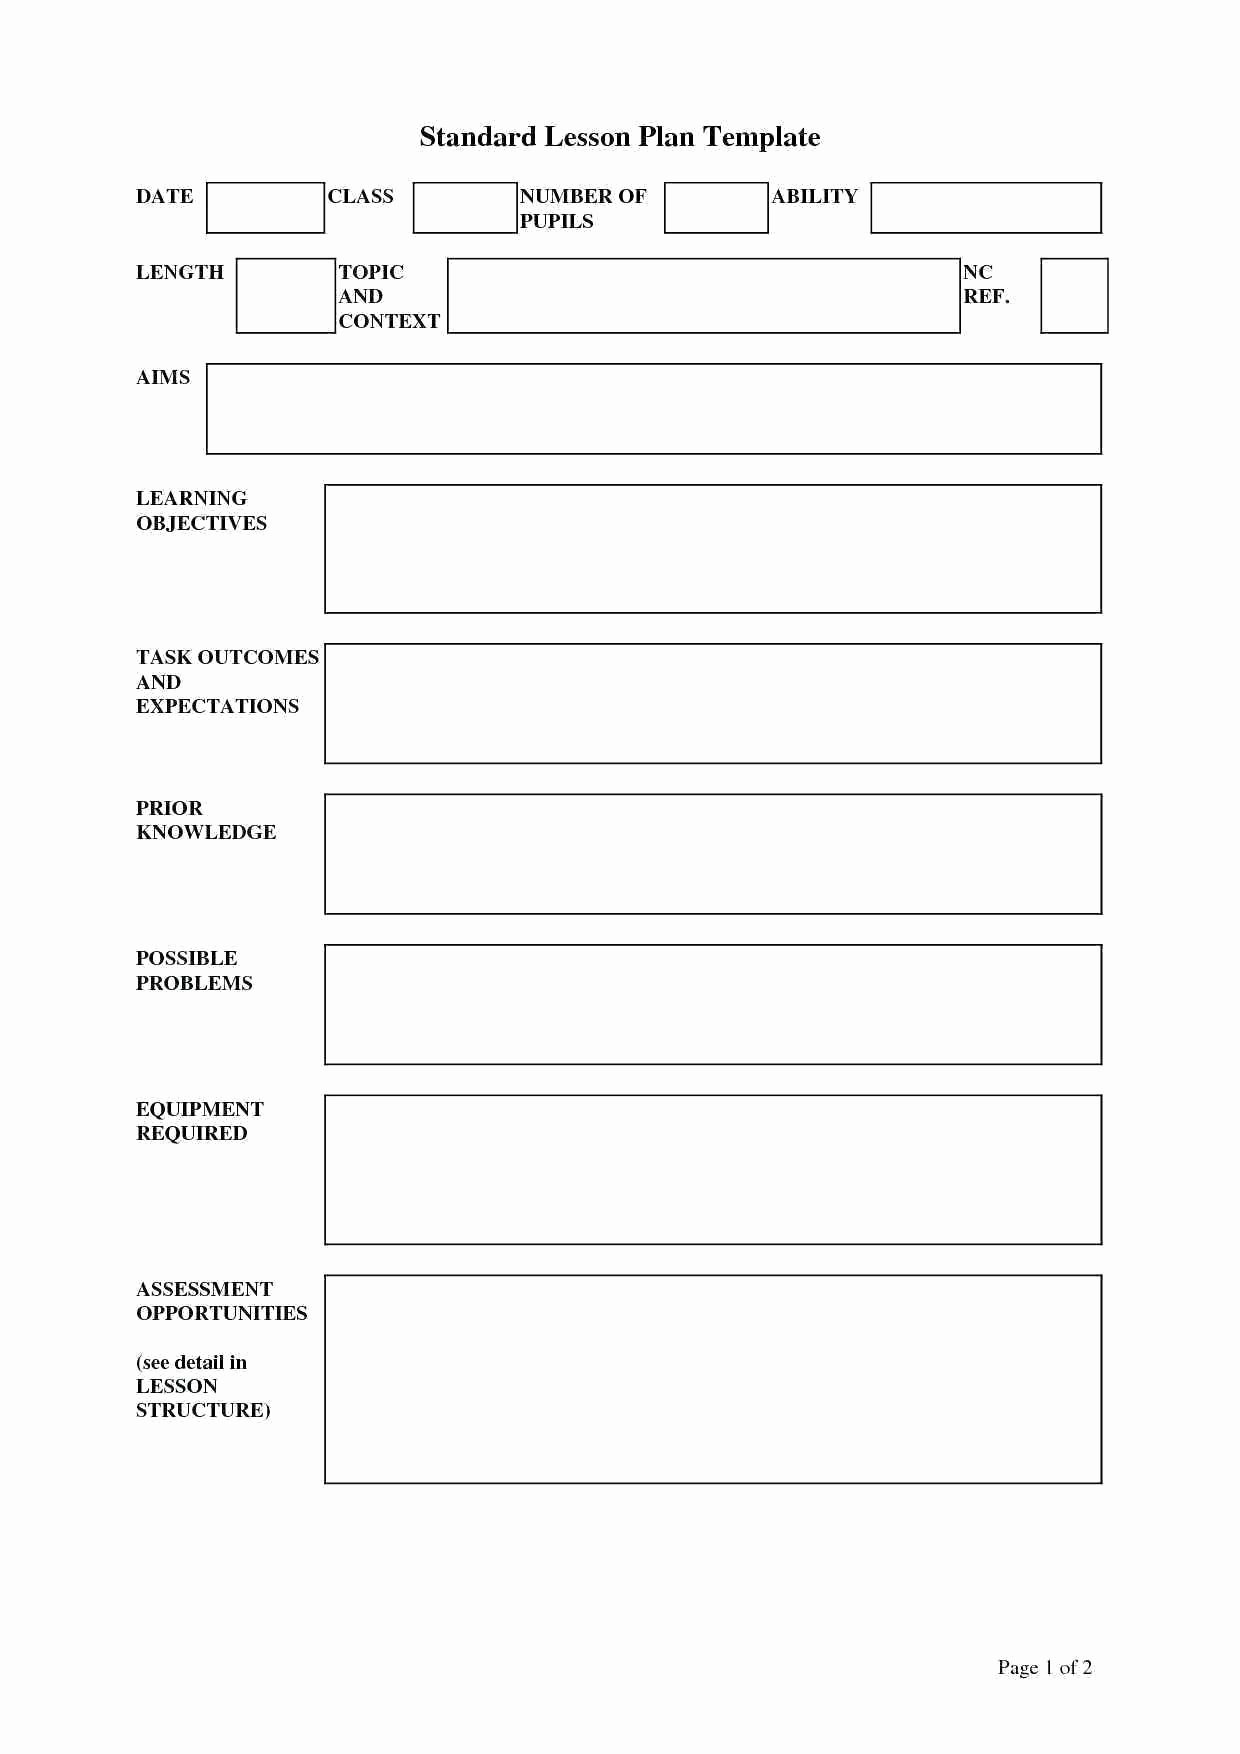 Siop Lesson Plan Template 3 New Siop Lesson Plan Example 2nd Grade for First